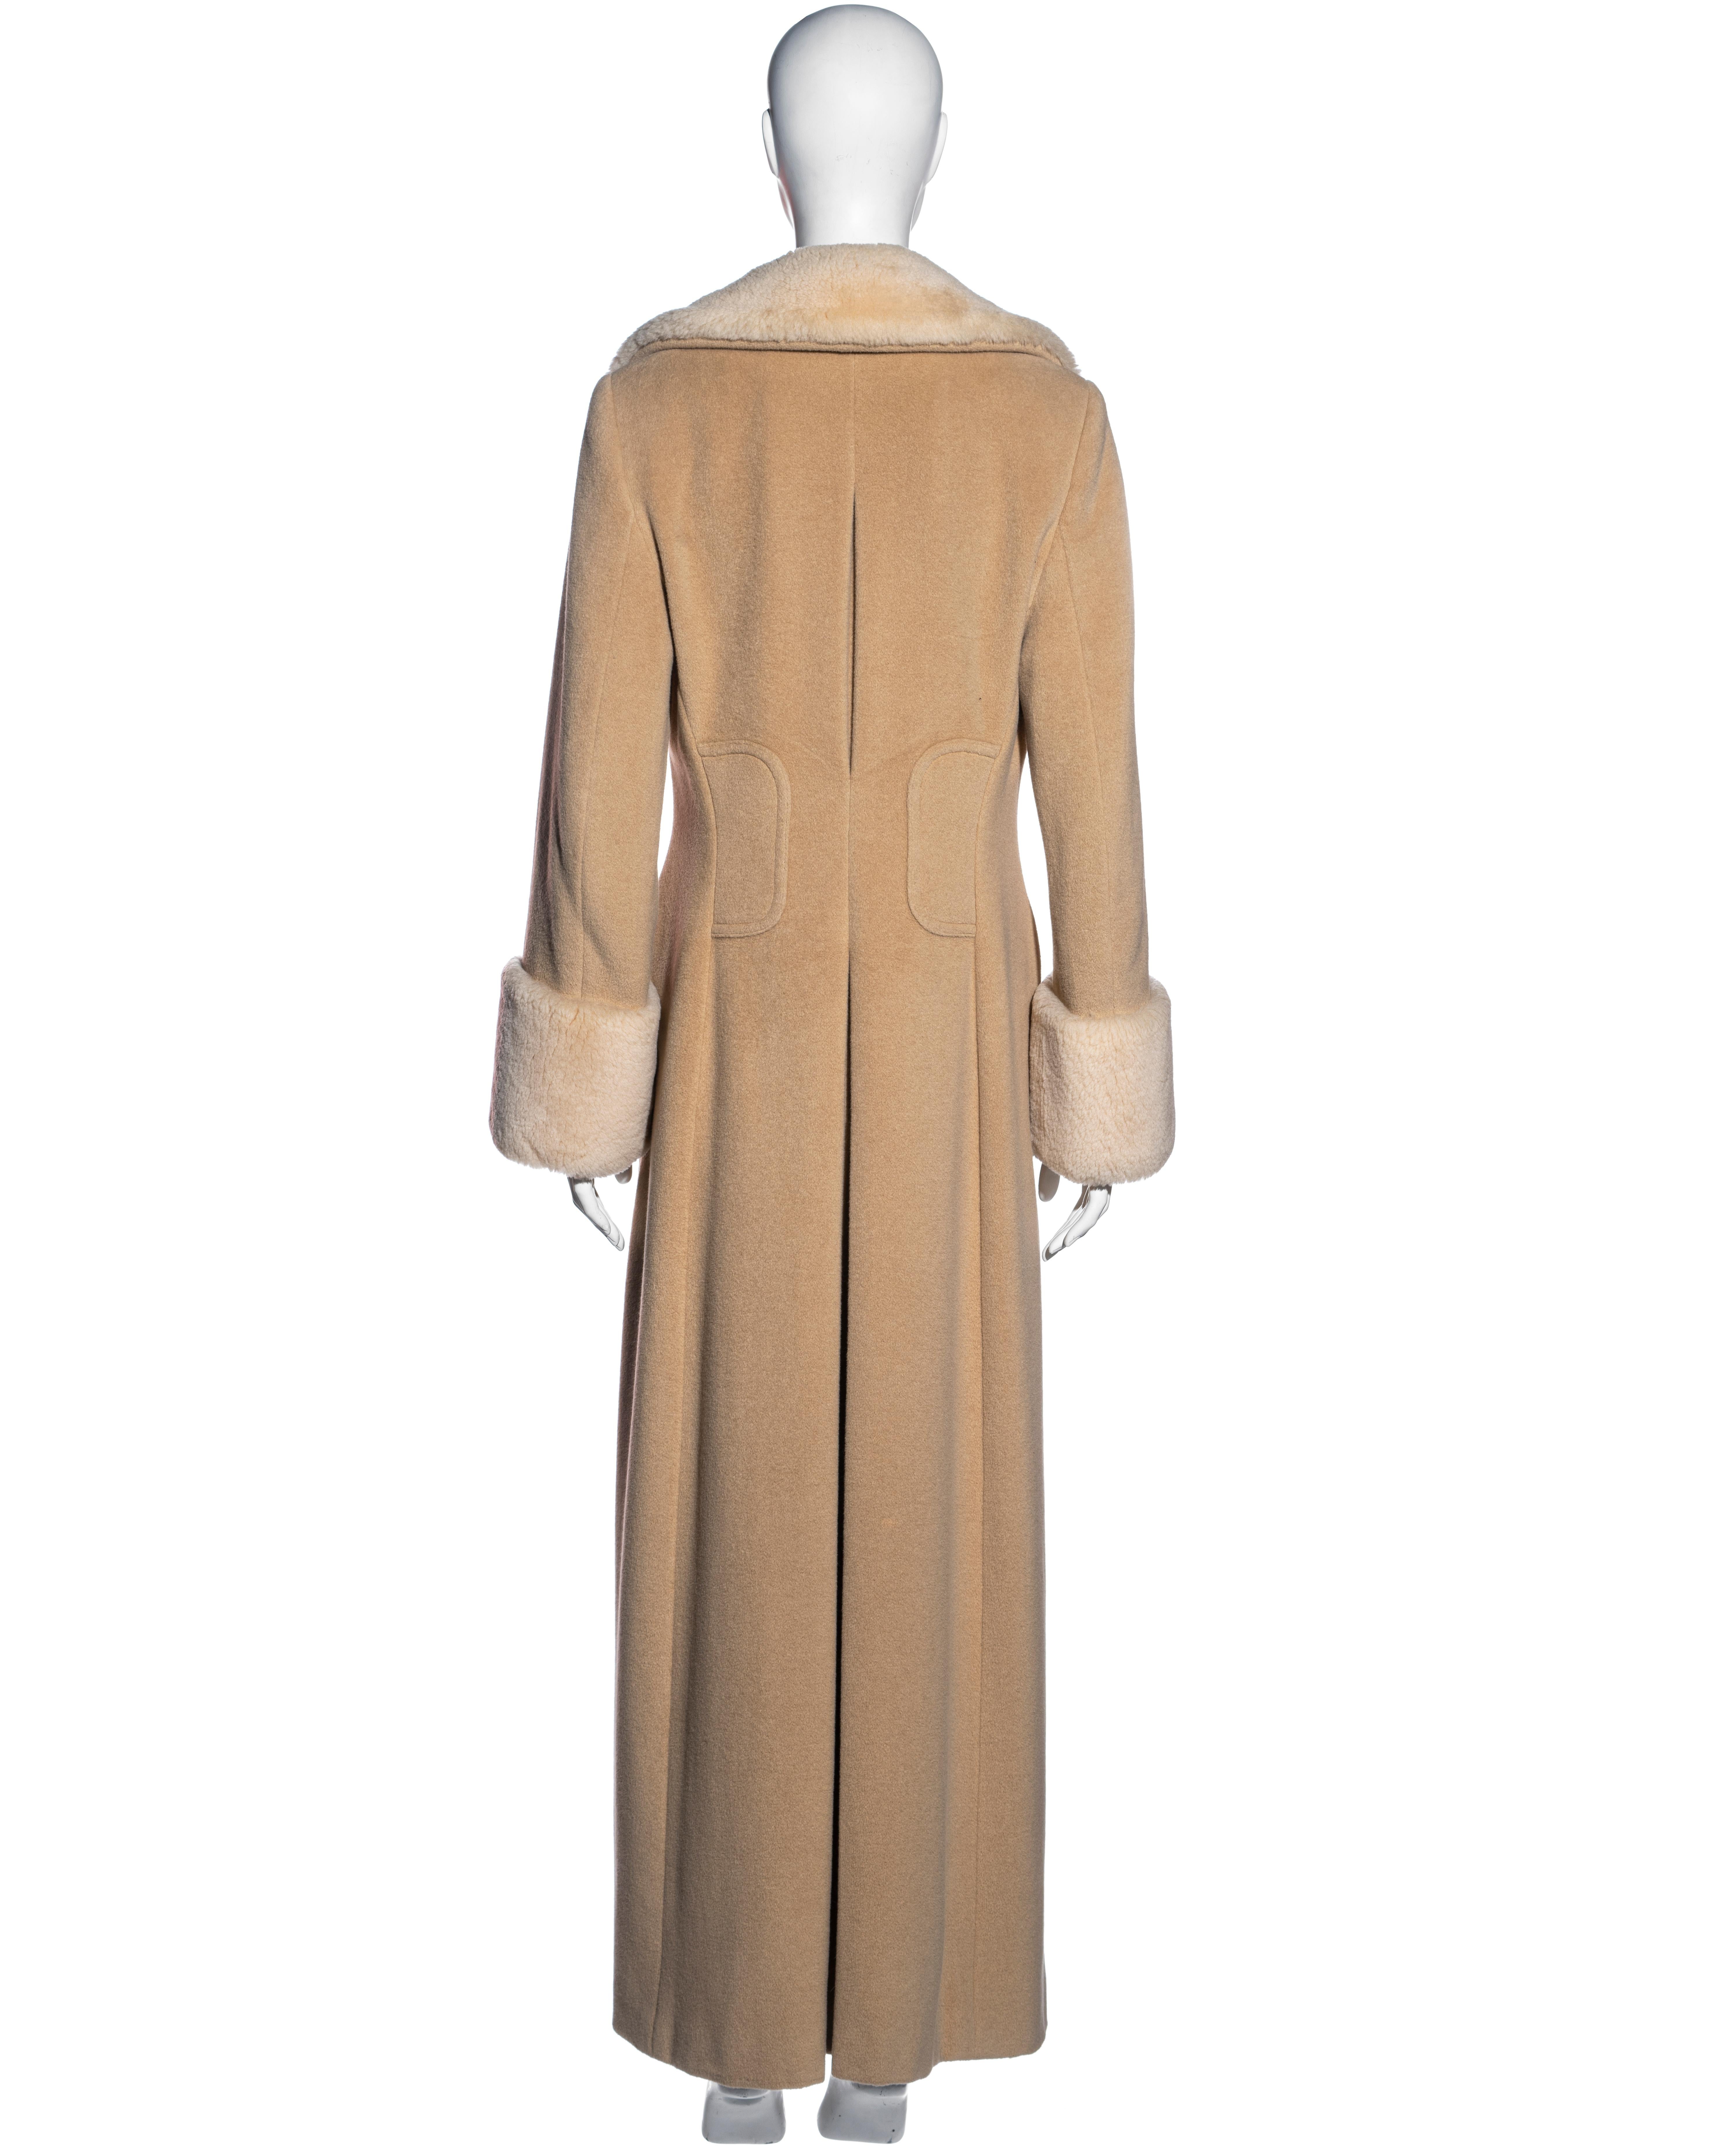 Women's Givenchy by Alexander McQueen beige angora wool and shearling coat, c. 1999-2001 For Sale